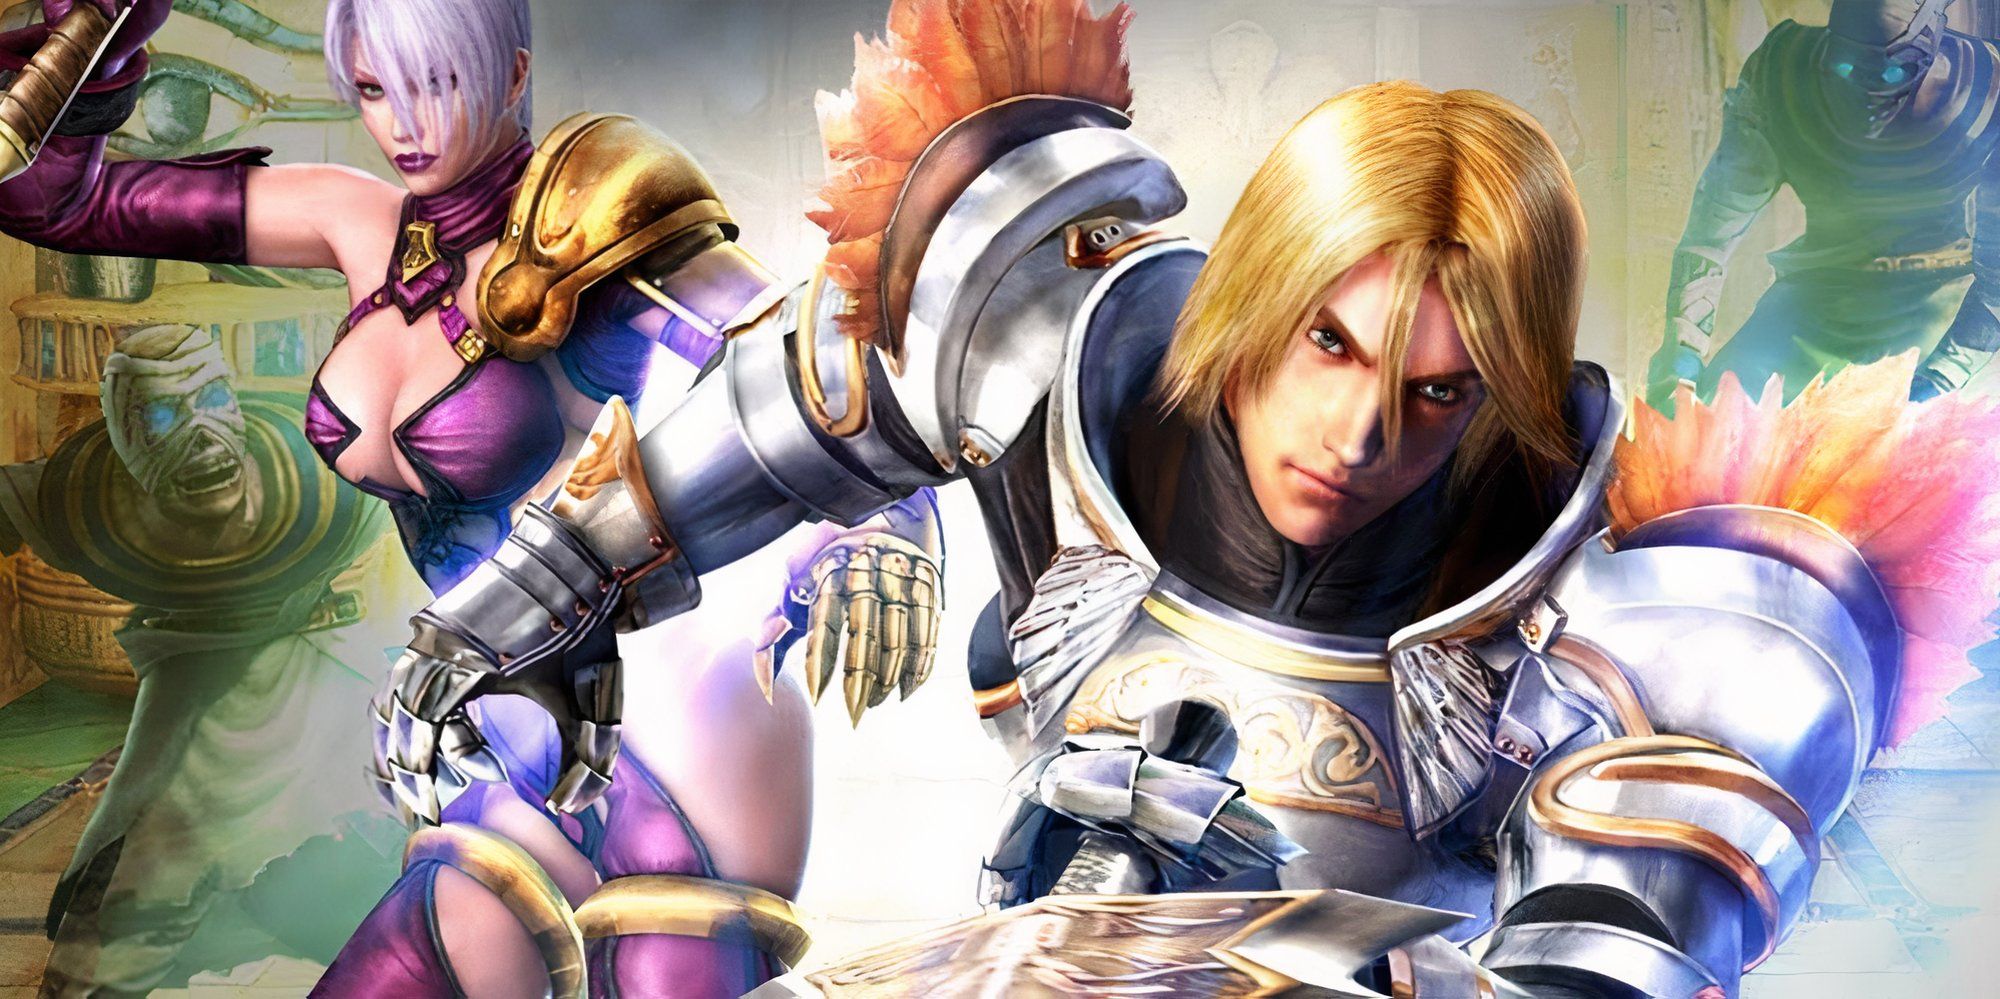 Promo art featuring characters in Soulcalibur Legends